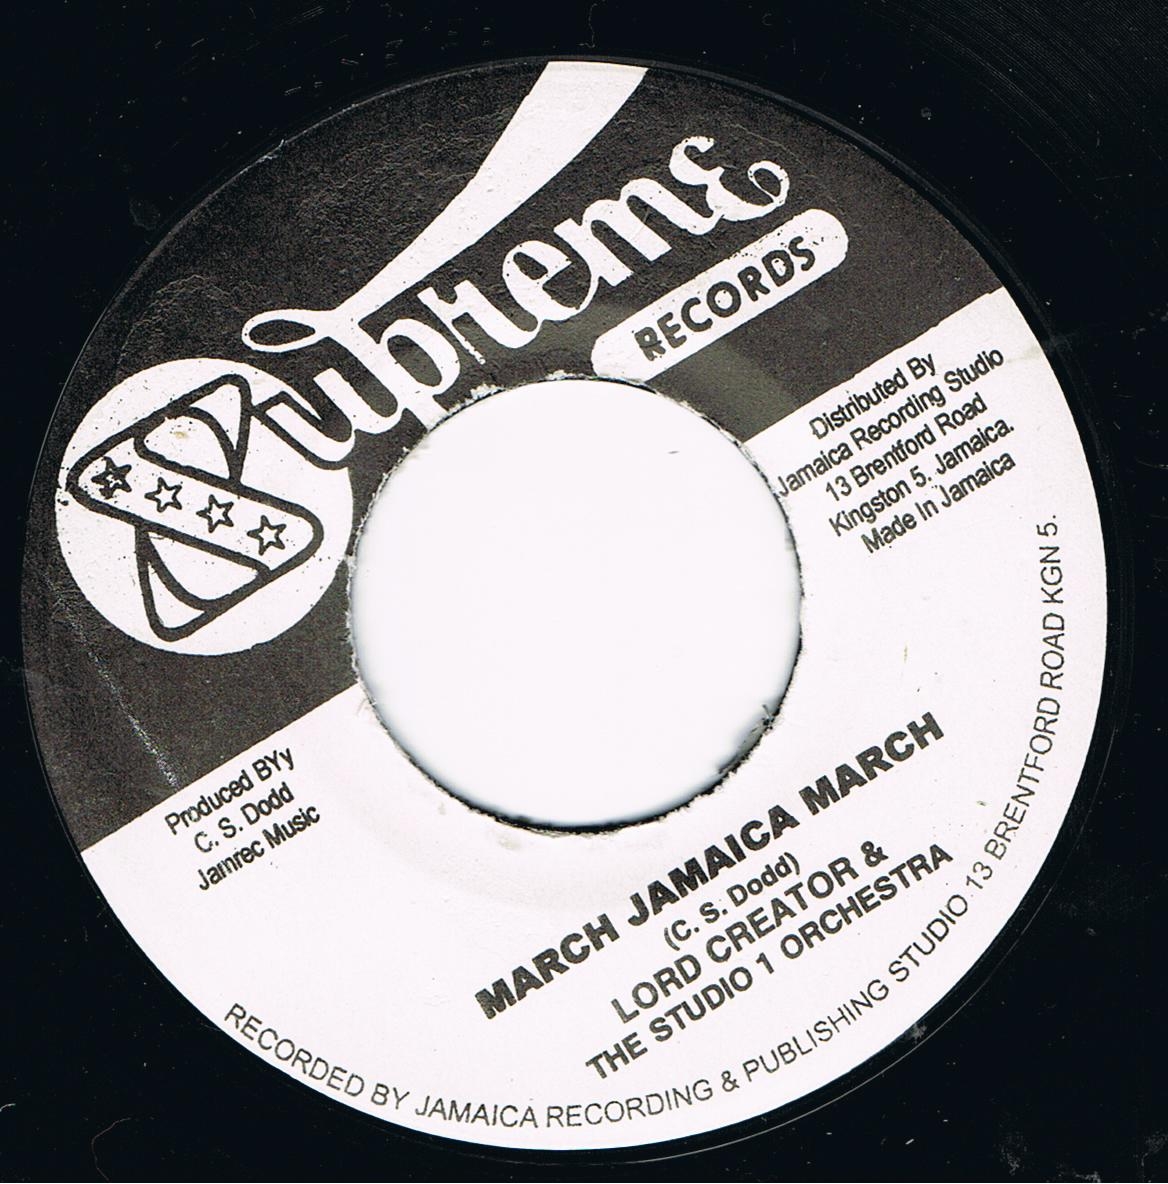 Lord Creator - March Jamaica March / Lord Creator - Mother's Love (Original Stamper 7")